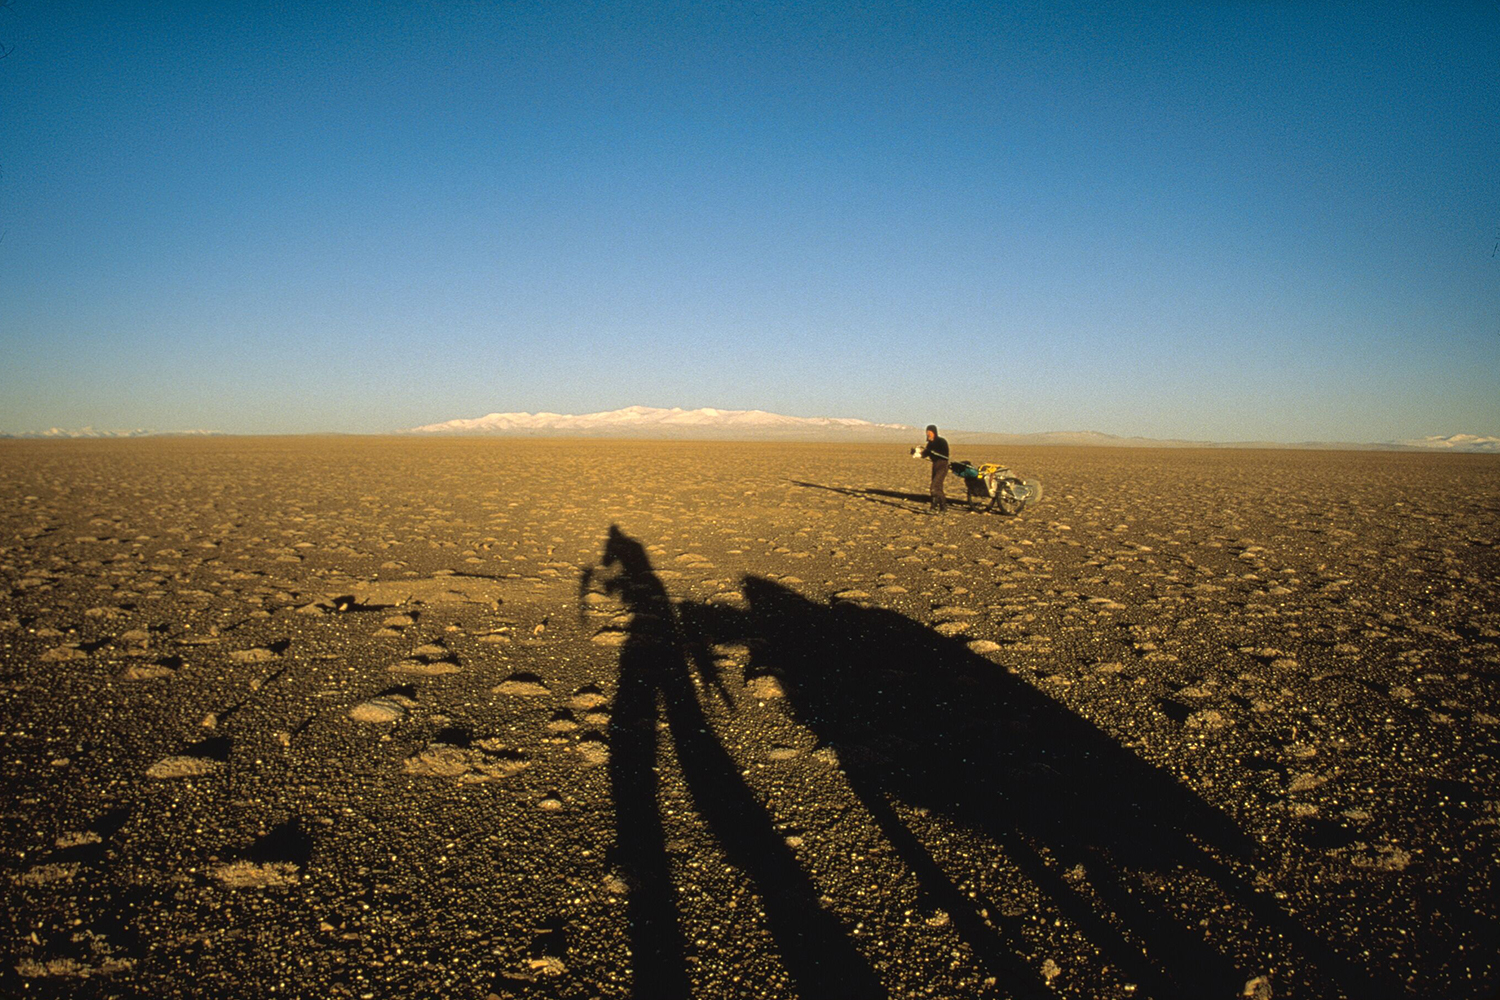 Rick Ridgeway pushing a cart across the Chang Tang Plateau in Tibet in 2002 with the shadow of Galen Rowell in the forground and an uninhabited expanse behind